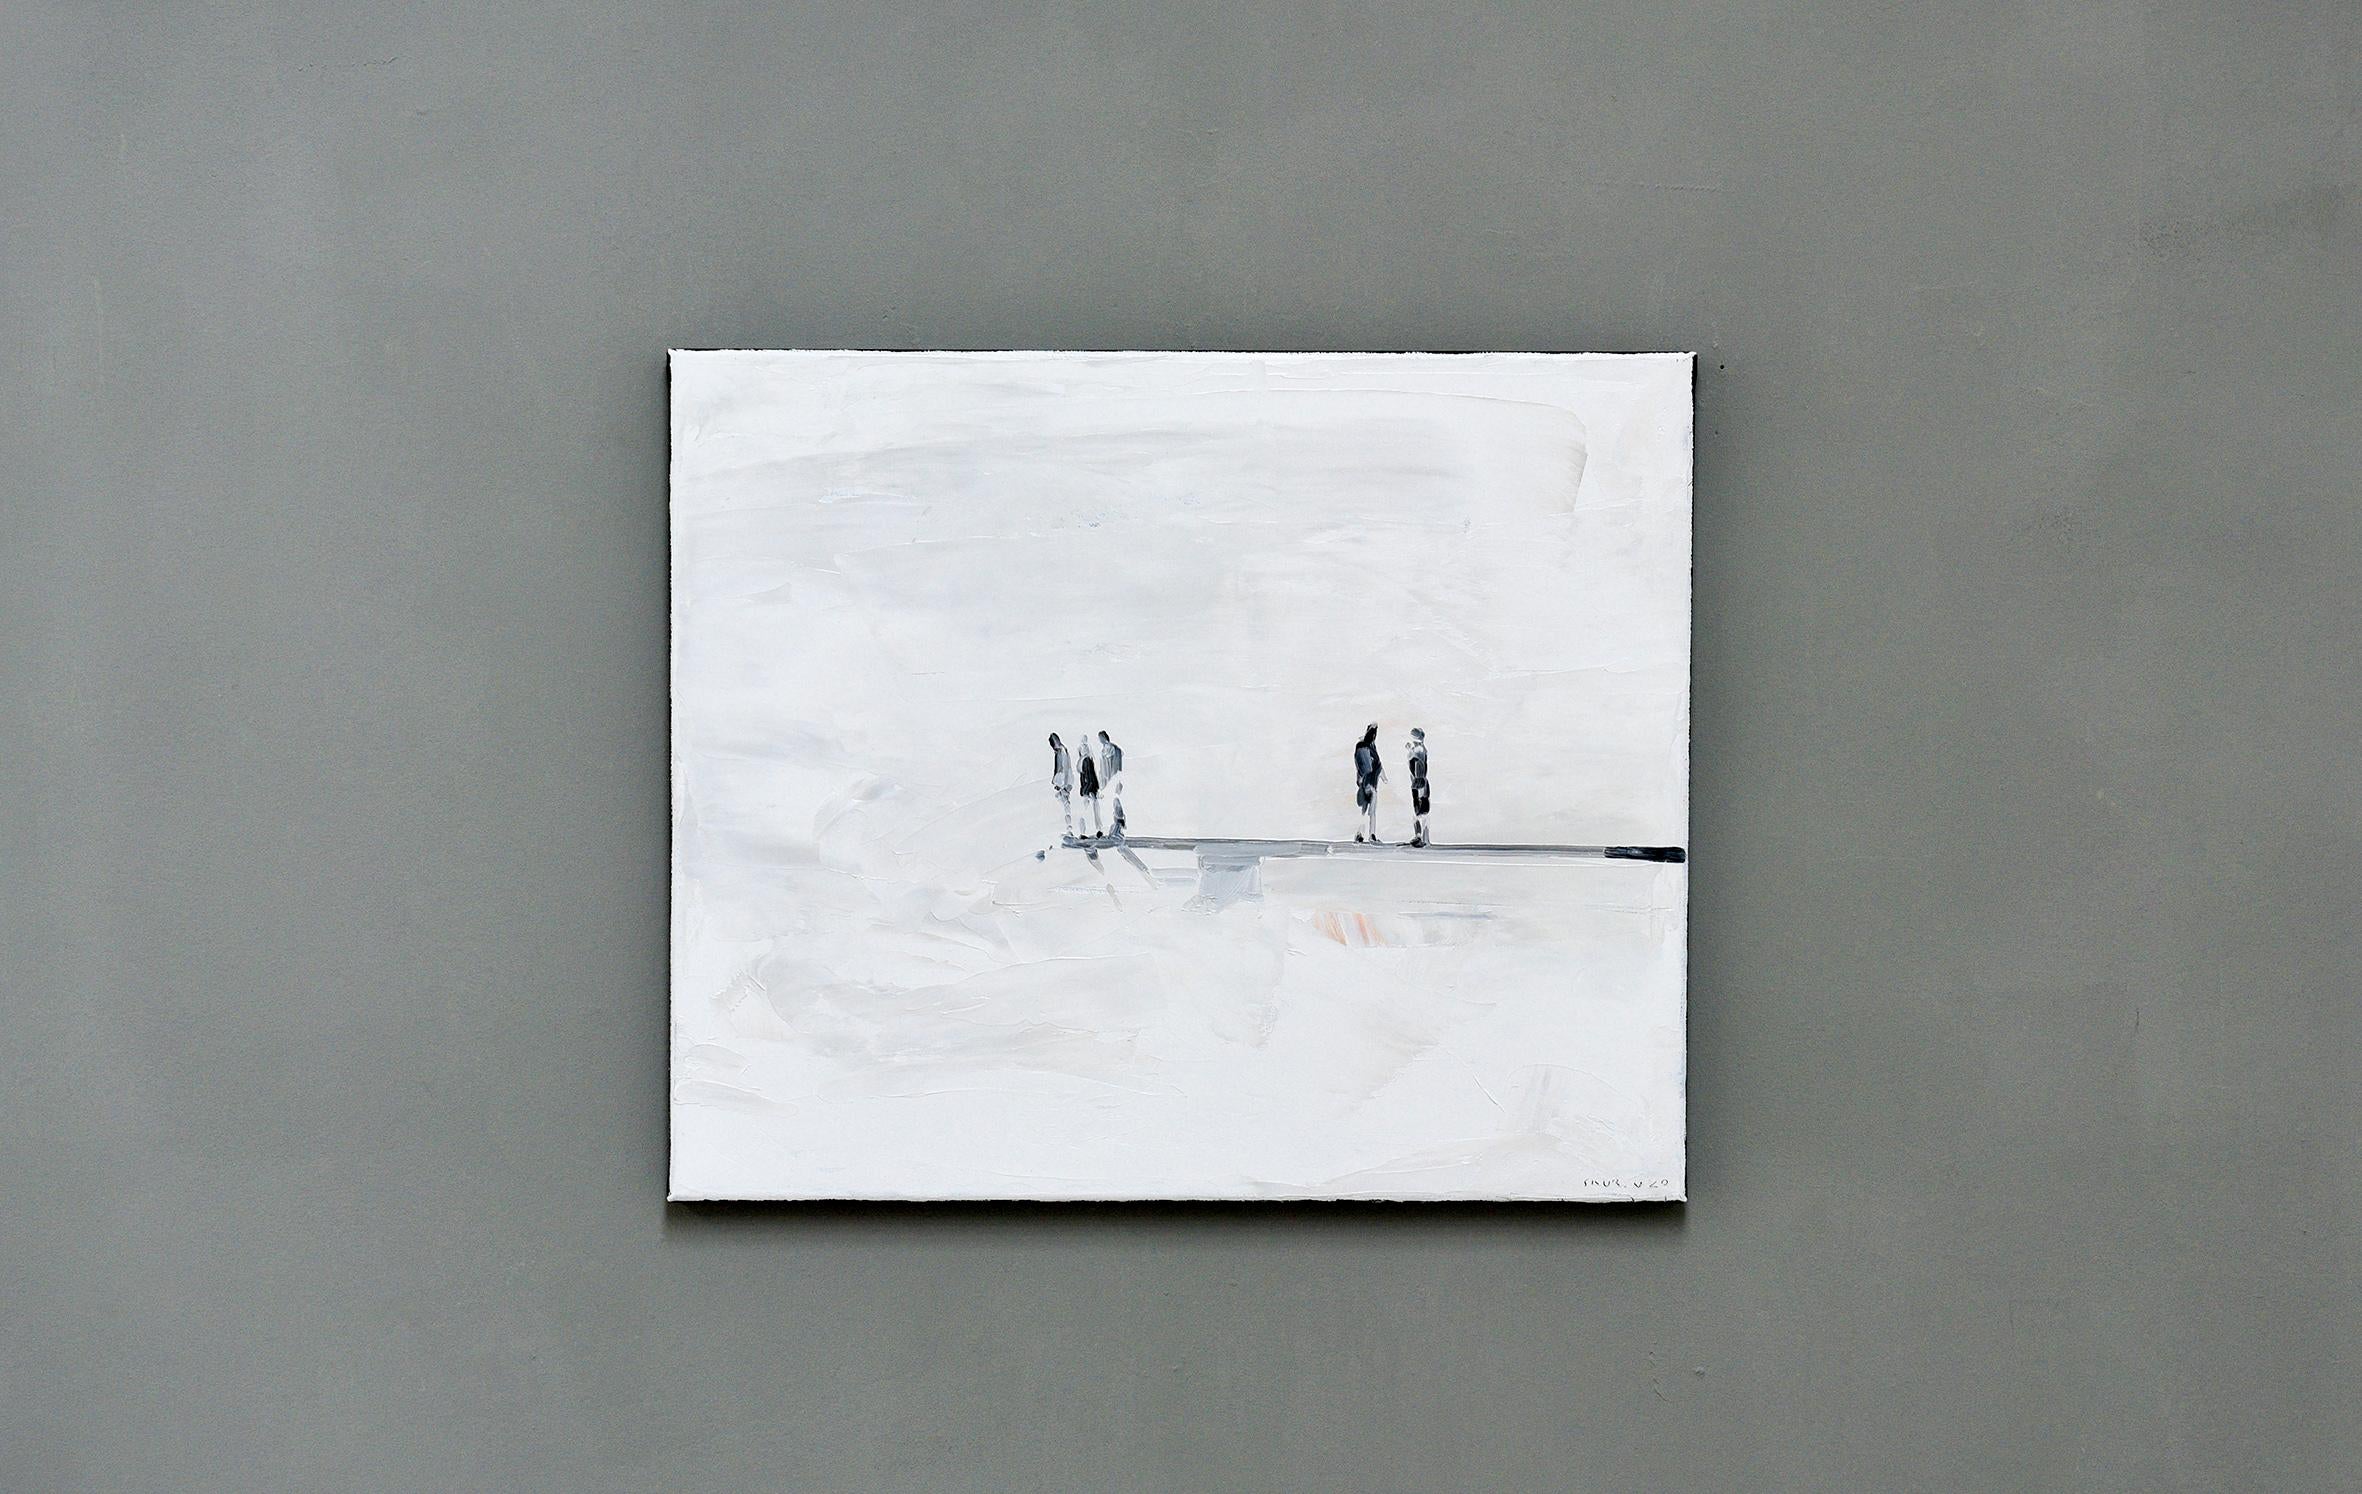 Steppingstone
50 x 60 cm
oil on canvas 
2020

A wide, apparently endless plain forms the background of the events: out of nowhere, dark figures enter the scenery, as if coming from the depths of the canvas, appearing through layers of bright, shiny